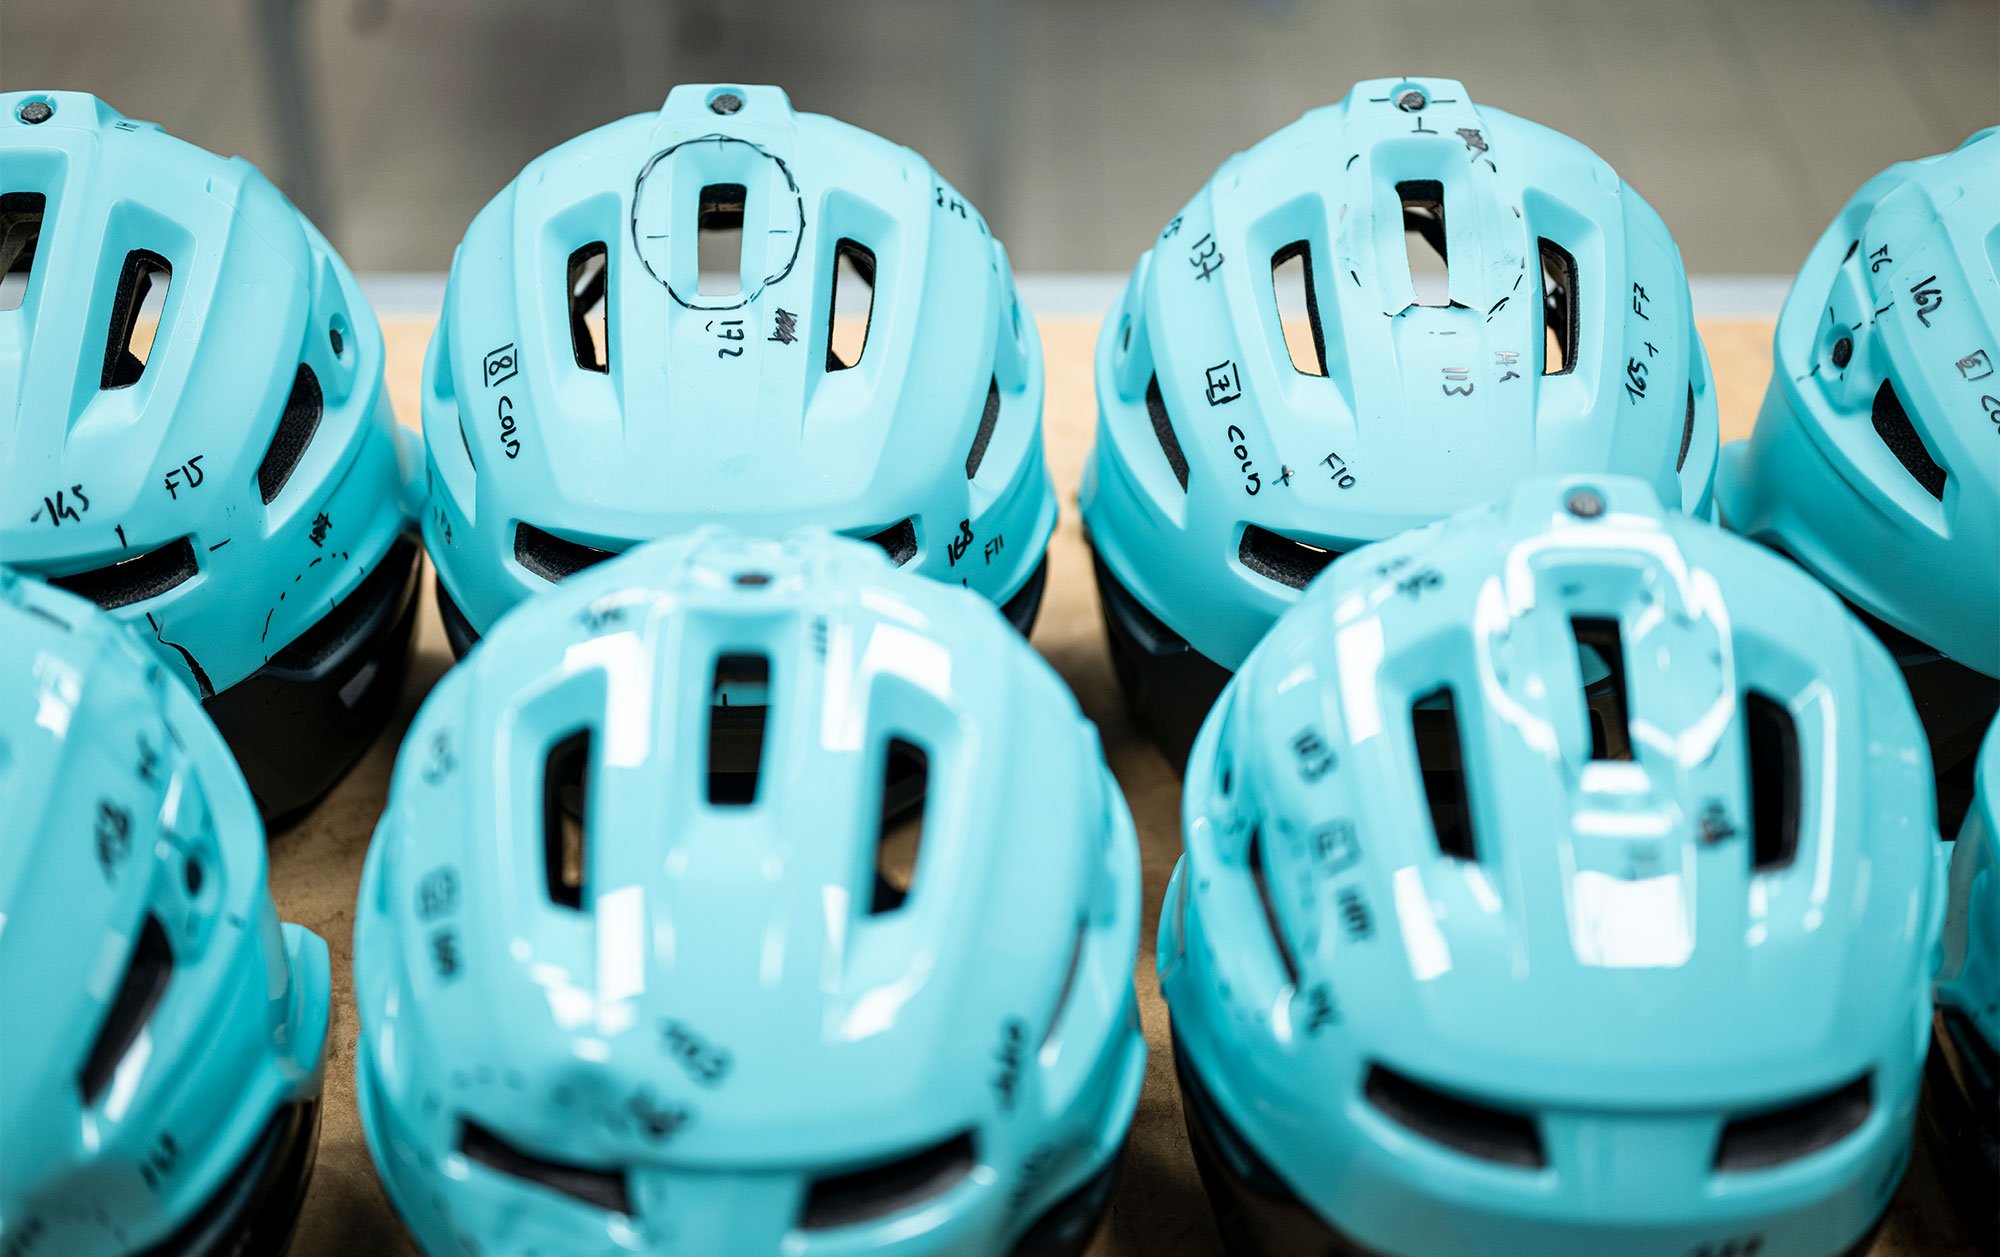 Bluegrass Vanguard is a Full-Face MTB Helmet designed for Enduro, Trail and E-MTB which is NTA certified